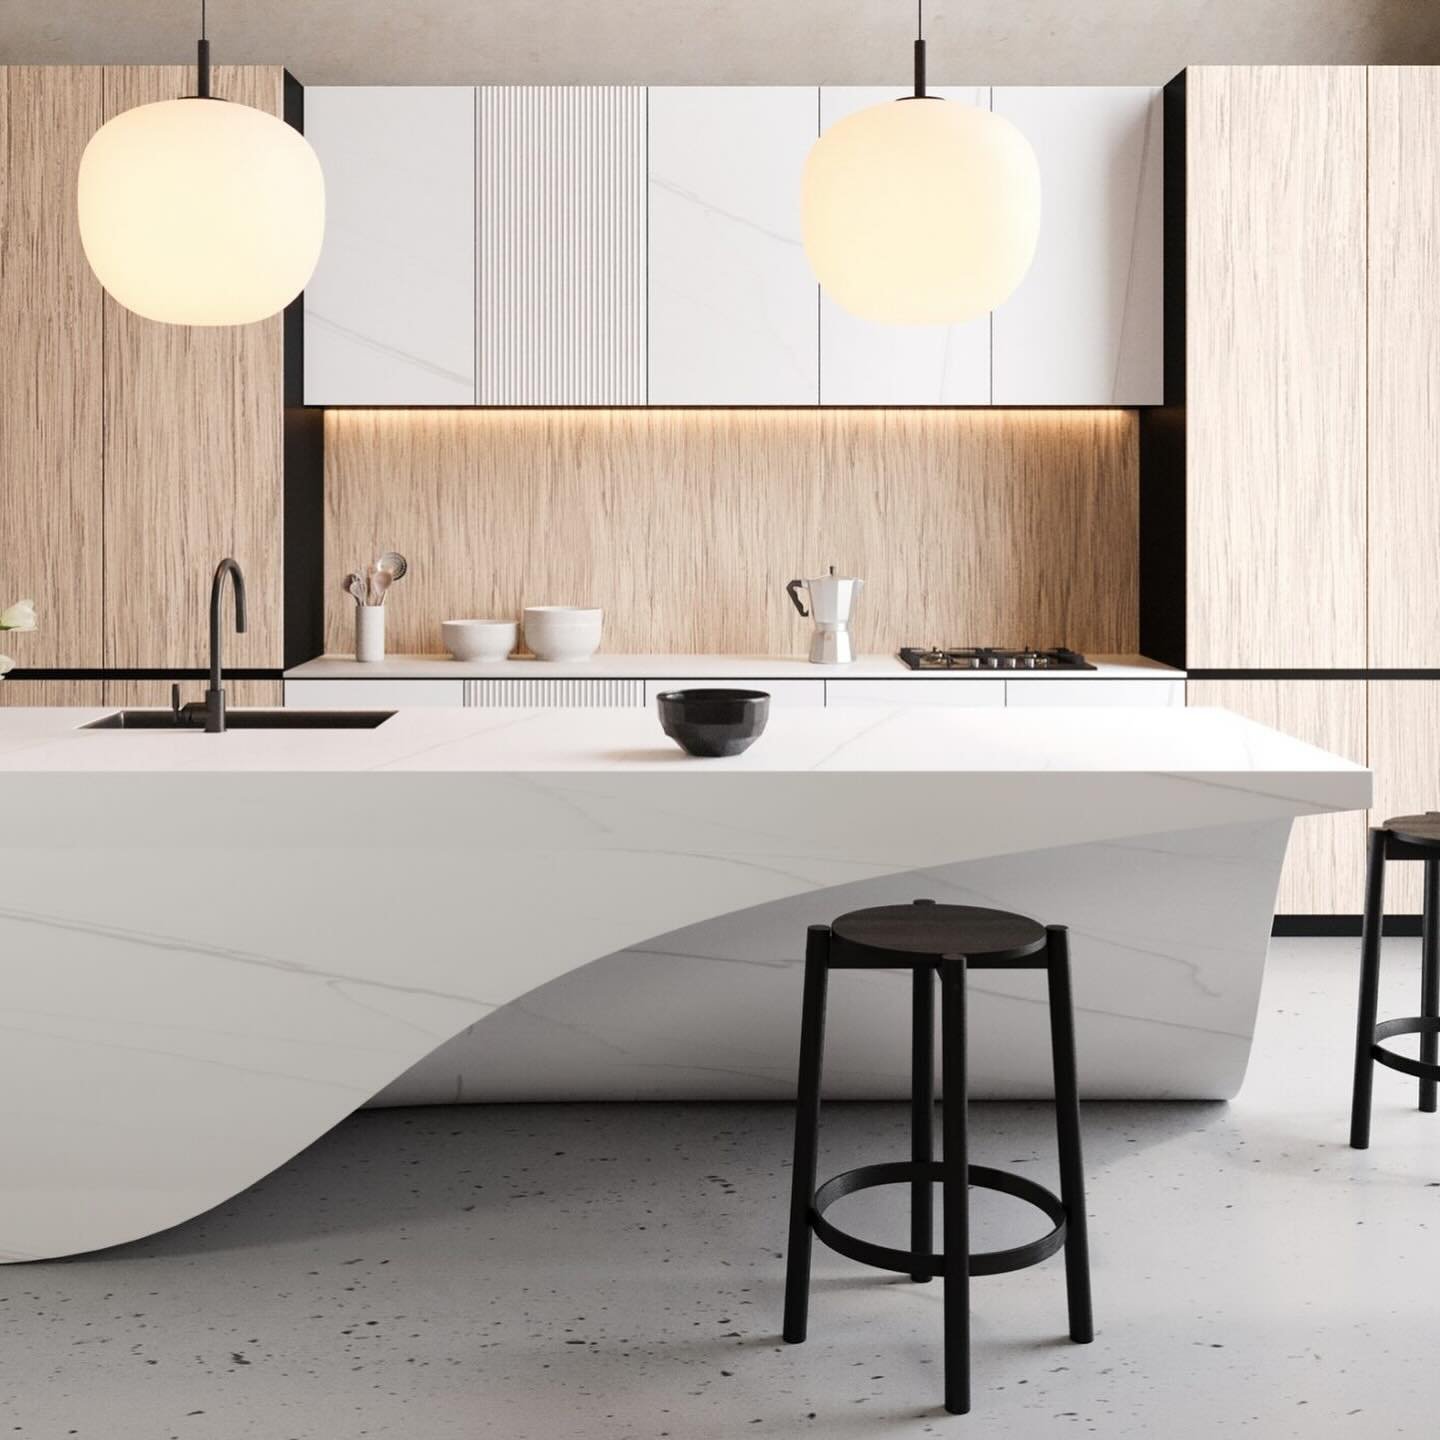 Explore the Distinctive Durasein Difference🌟 

Dive into the world of Durasein Solid Surface, now showcased at Residium.

Architects, designers, and homeowners can all appreciate the innovative composition of this solid surface material &mdash;zero 